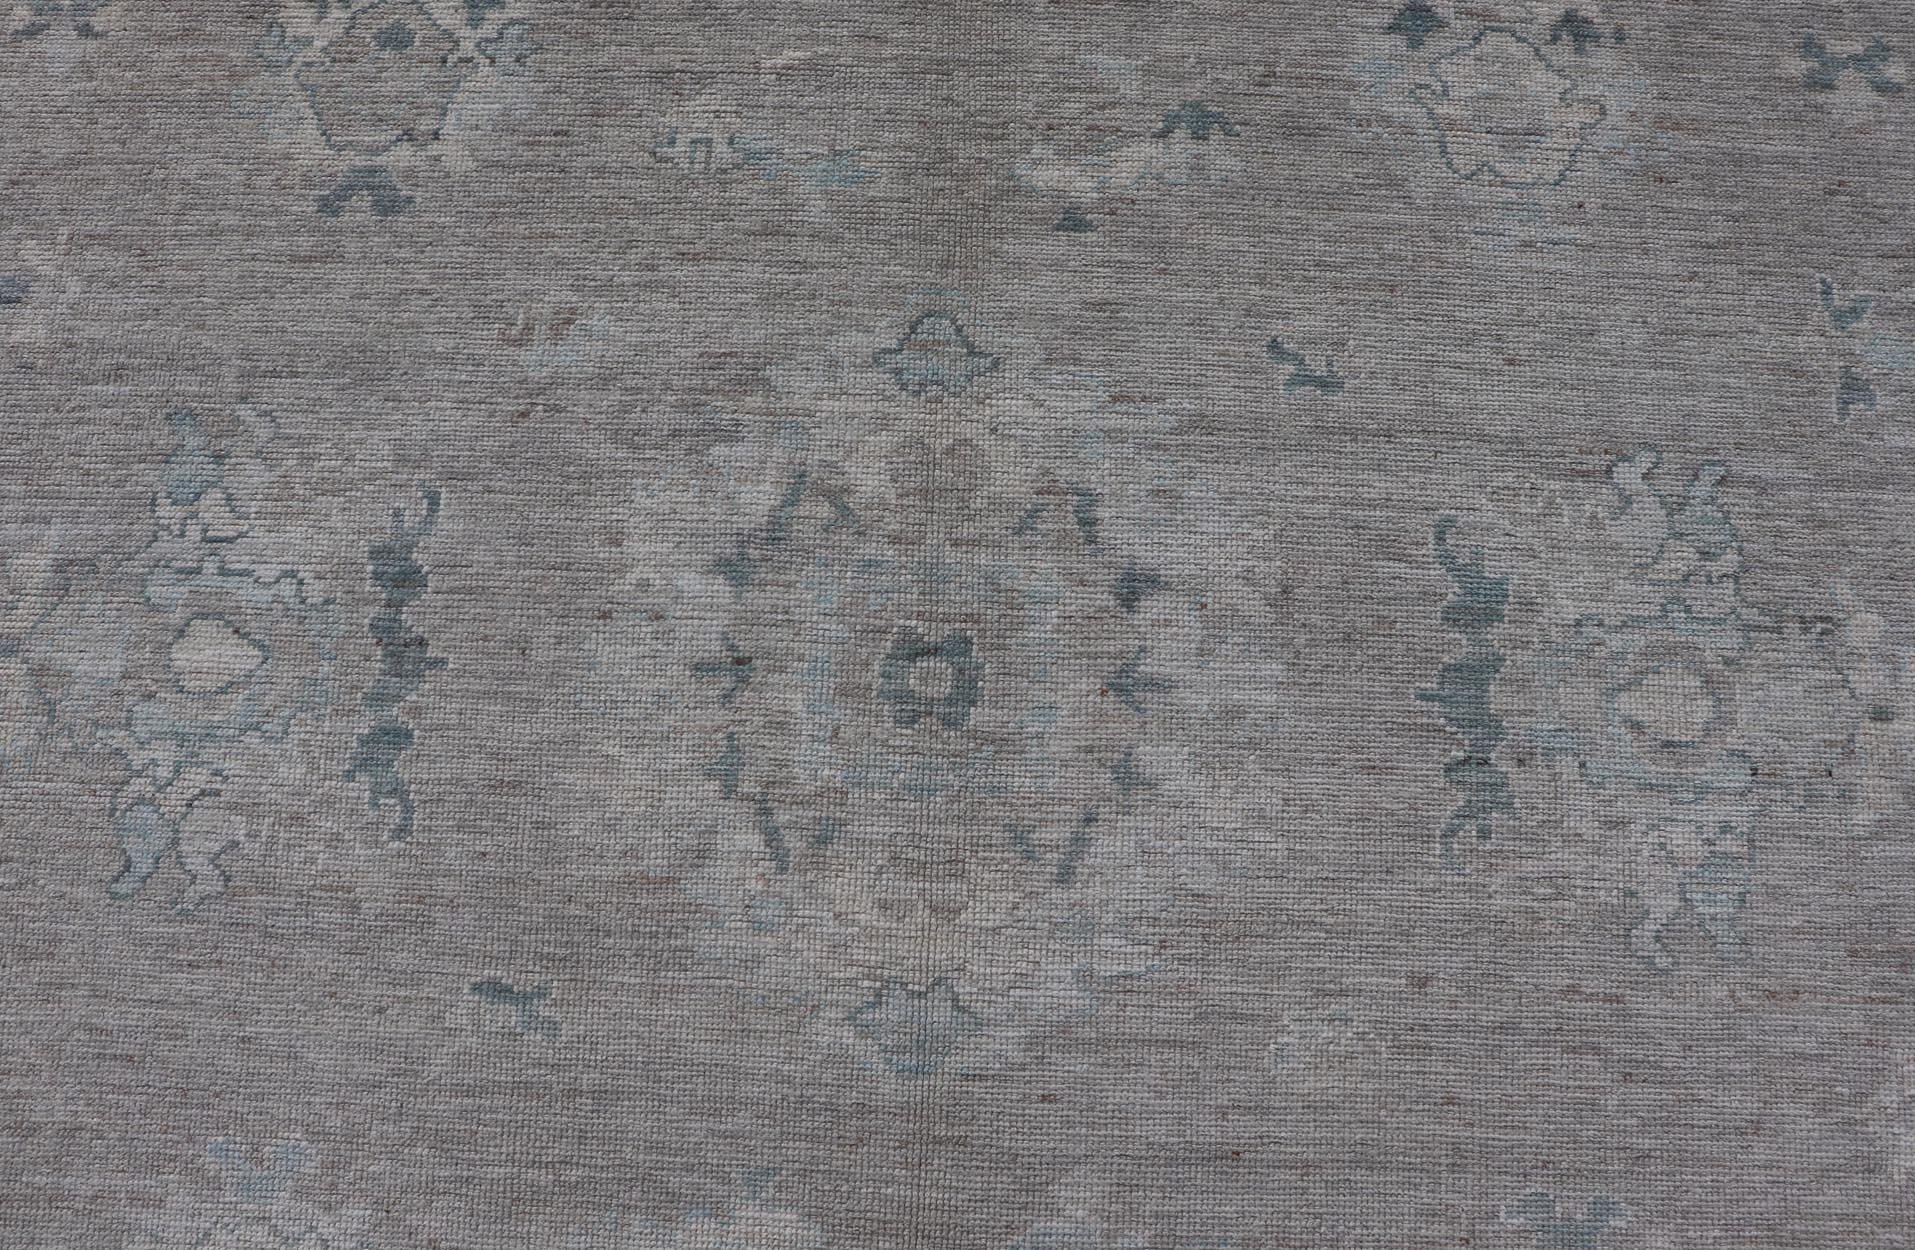 Large Modern Oushak with Floral Motifs in Wheat, Mushroom, Grey & Light Blue 6